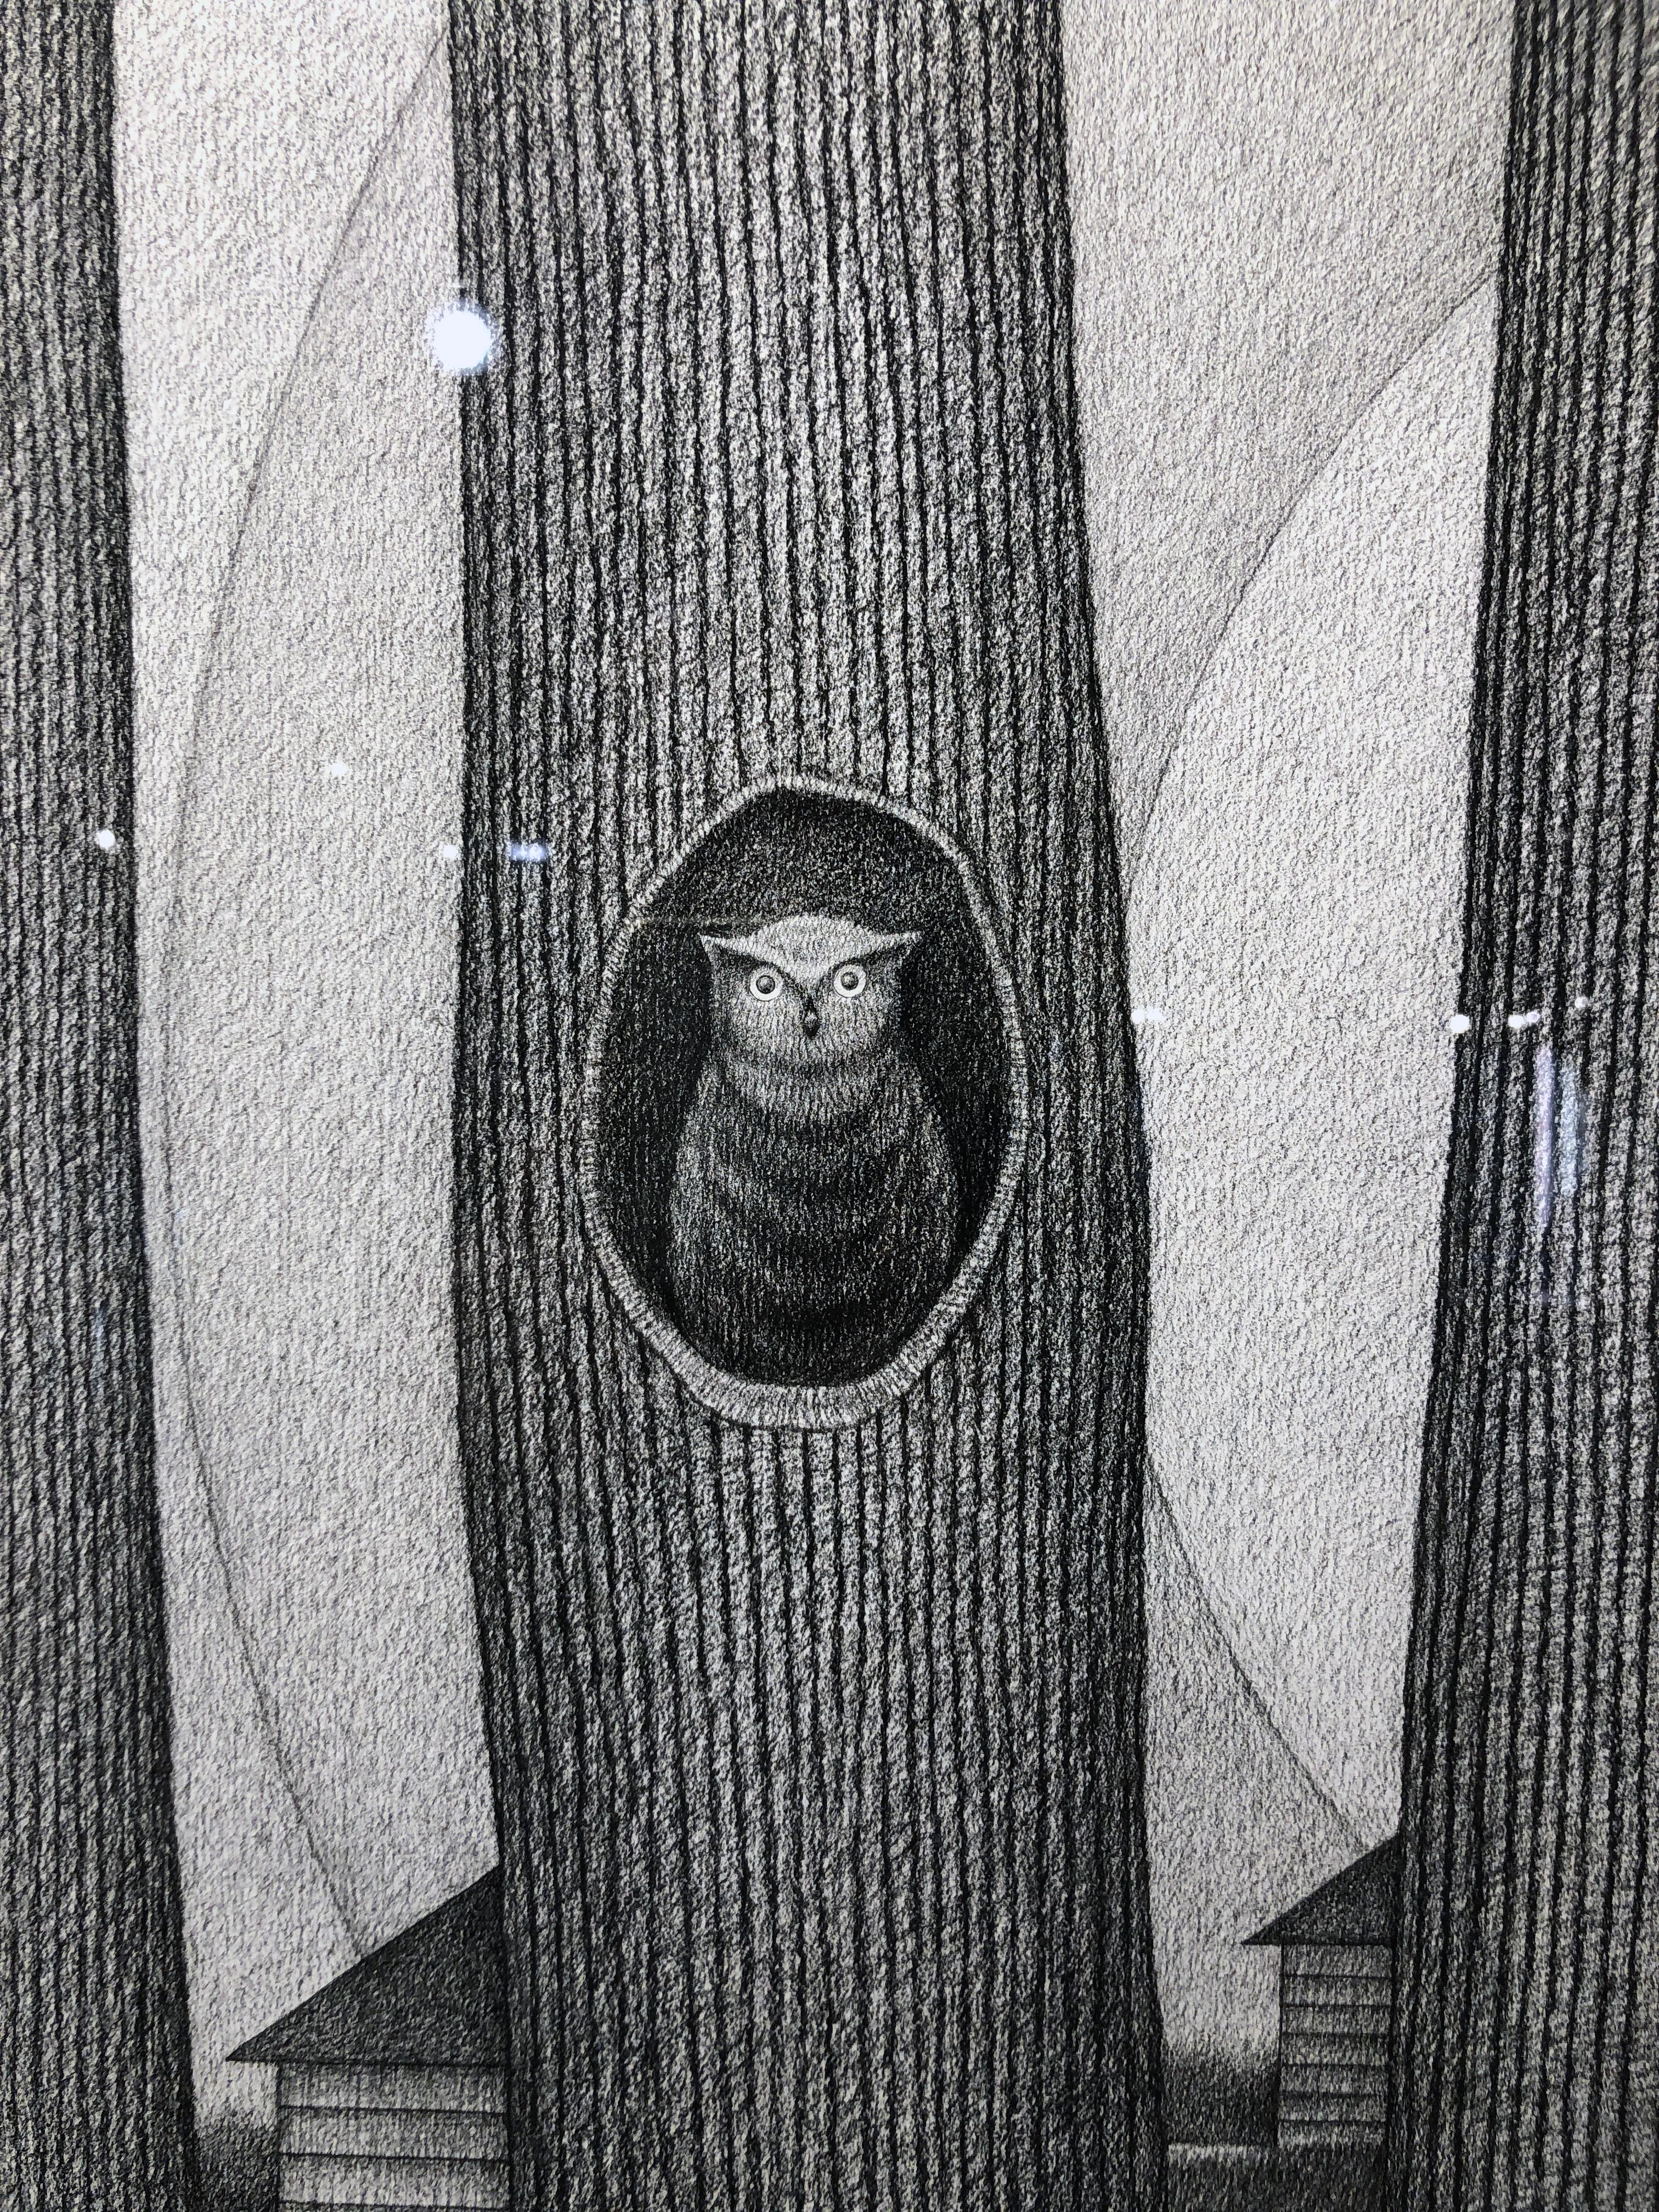 Rising I, Surrealist Landscape w/ Row of Trees & Owl, Graphite on Archival Paper - Gray Landscape Painting by John Hrehov